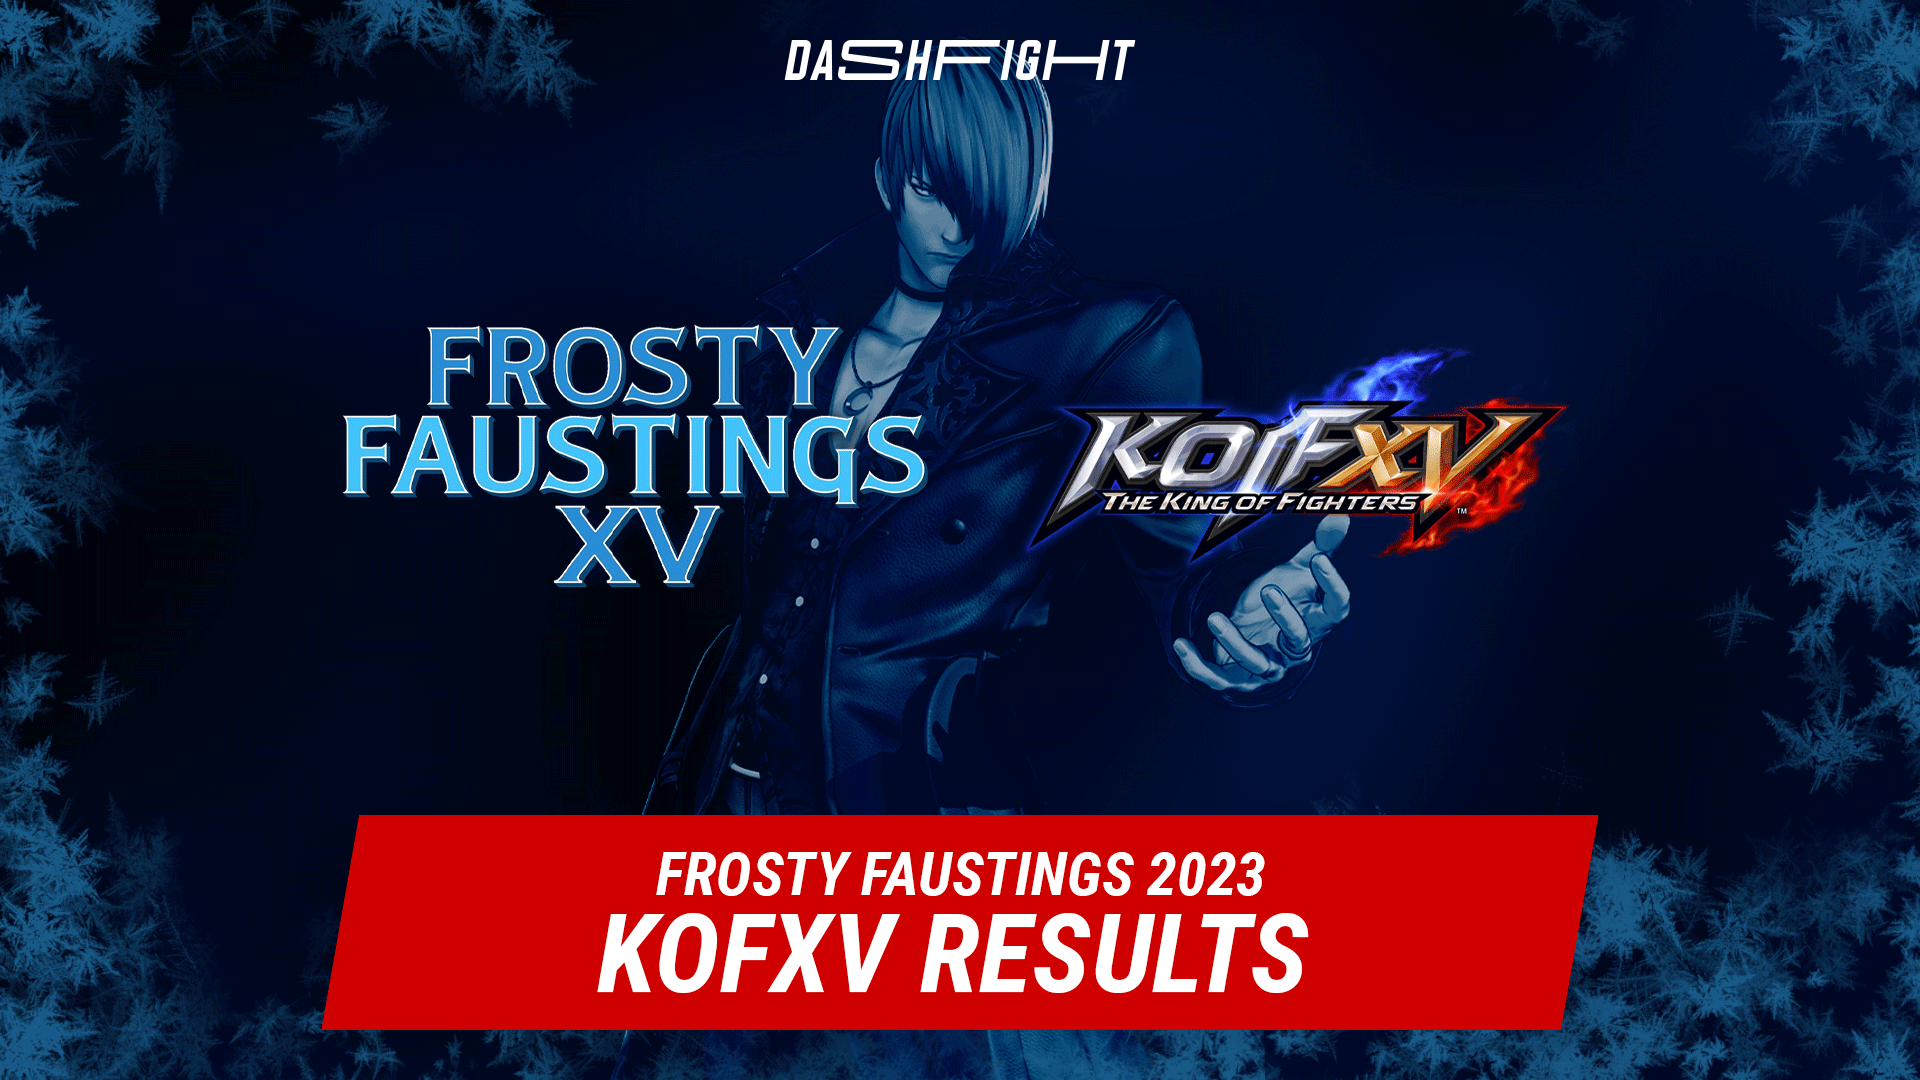 KOF XV at Frosty Faustings XV 2023: Lacid Clinches The Win